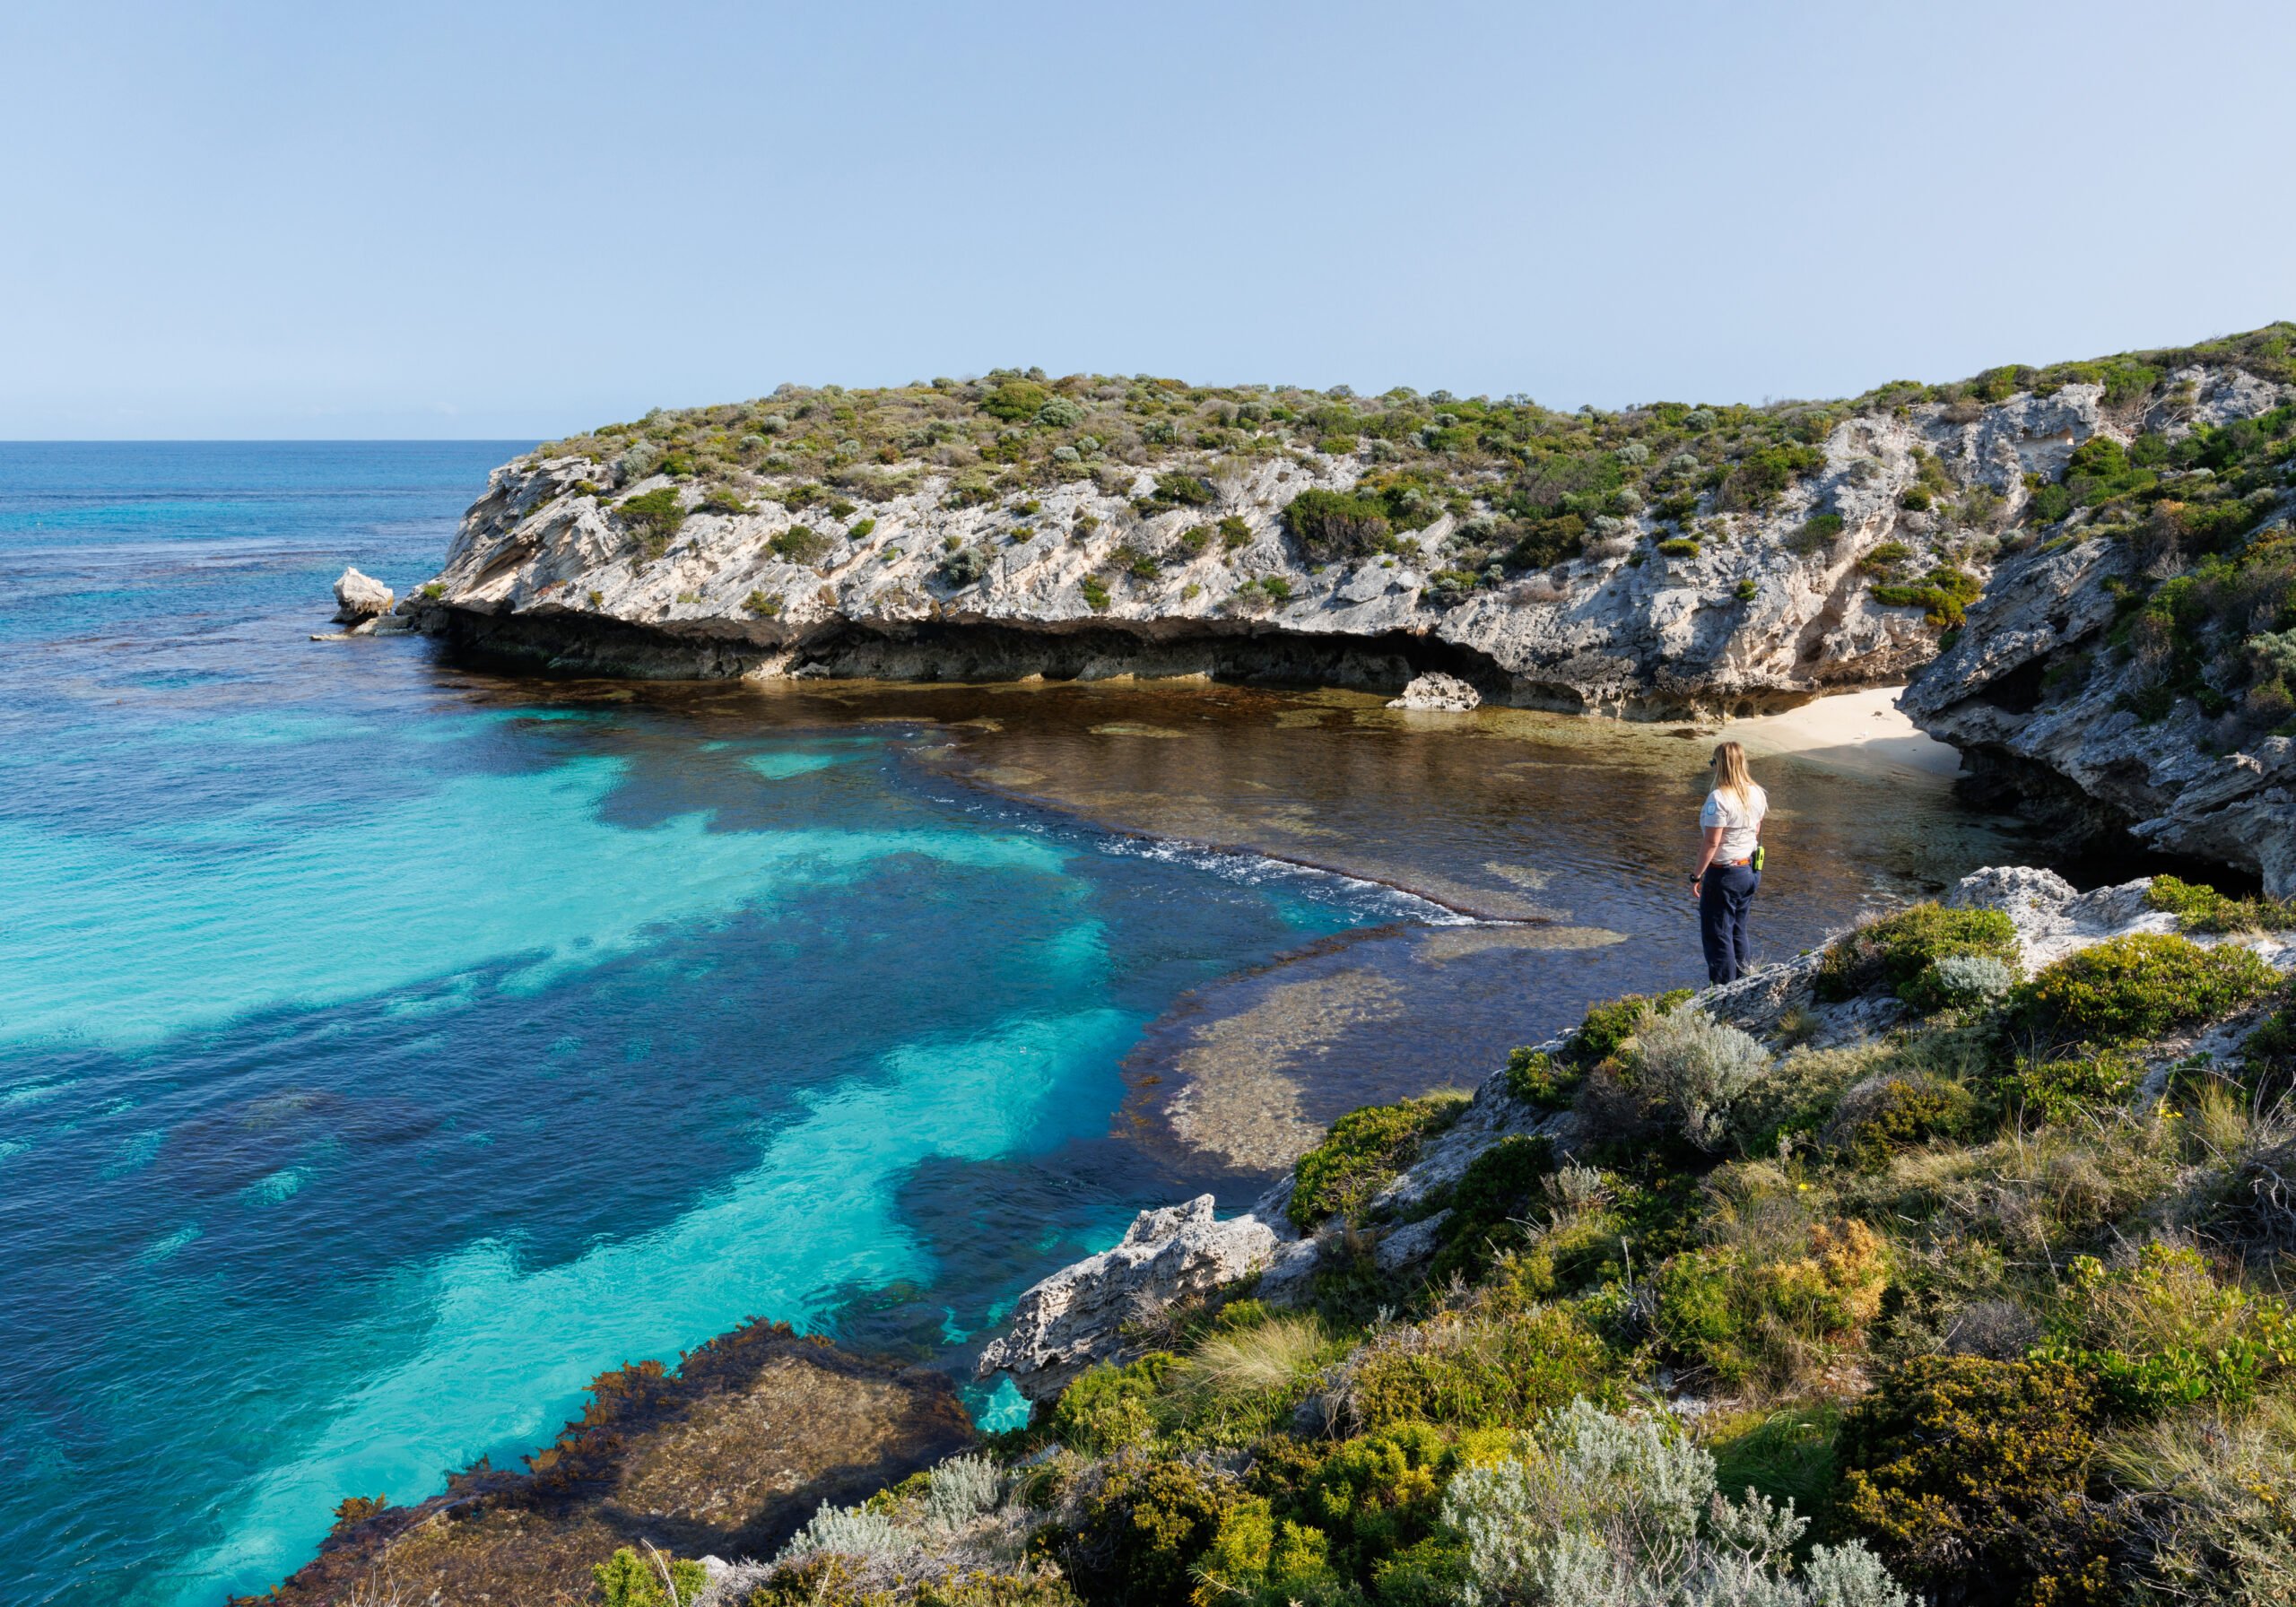 Image for article: Rottnest Island: More than quokkas